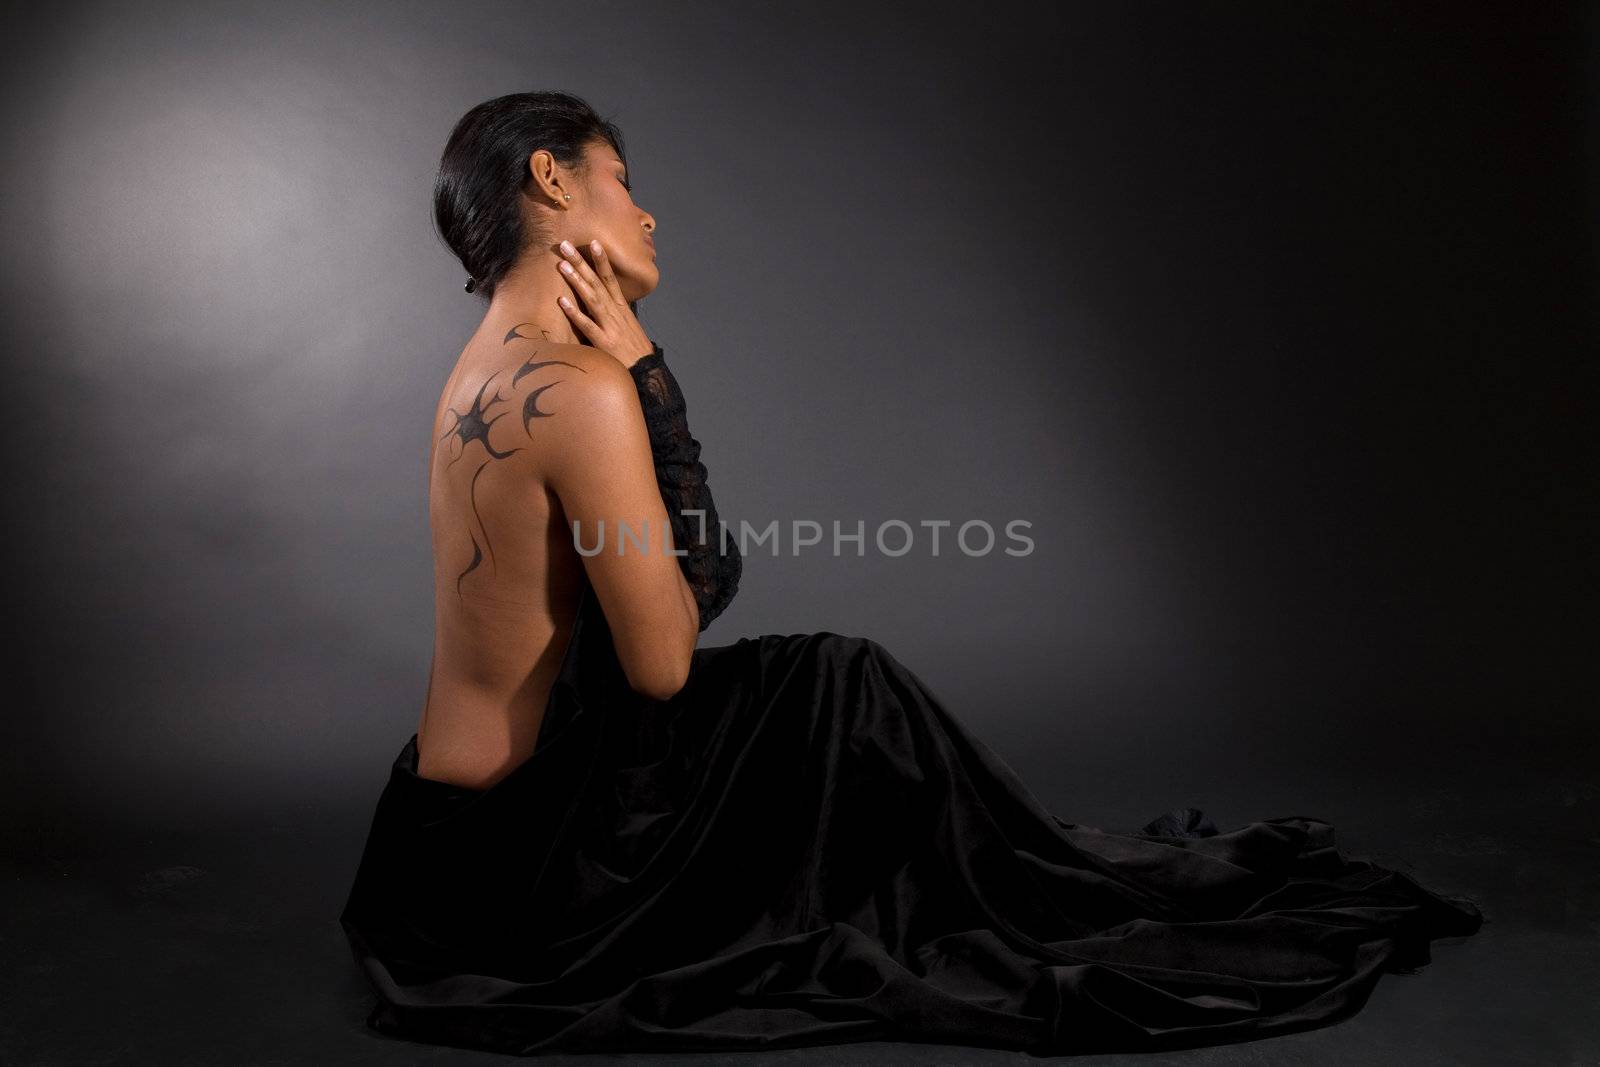 Beautiful woman sitting on black background surrounded by black velvet